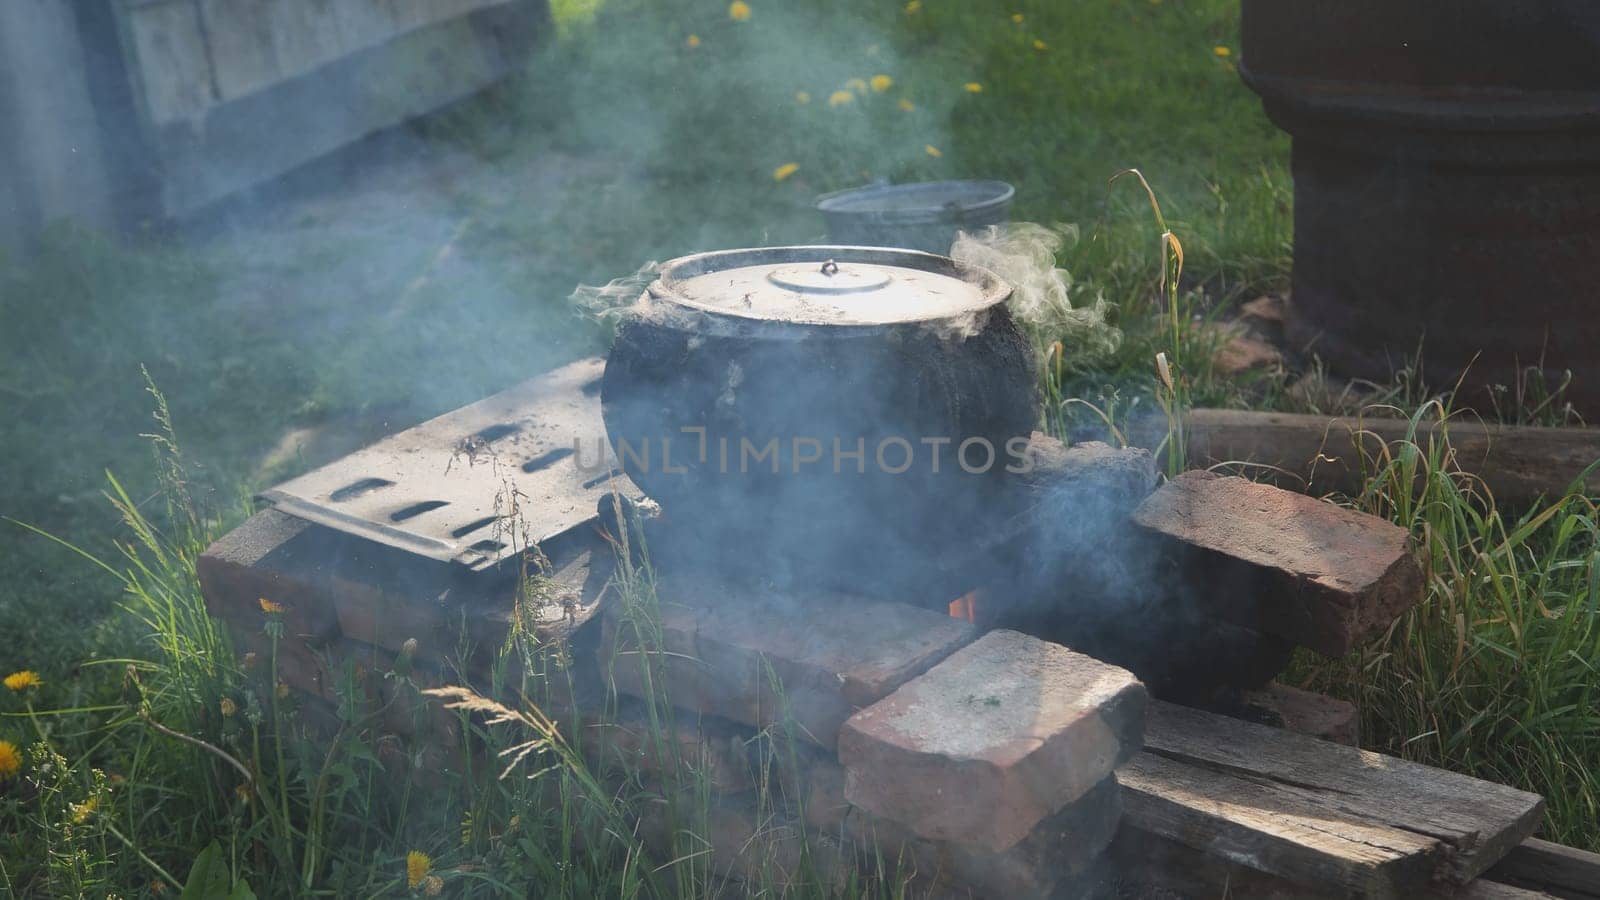 The cast iron in the village is used to cook food for the livestock. by DovidPro